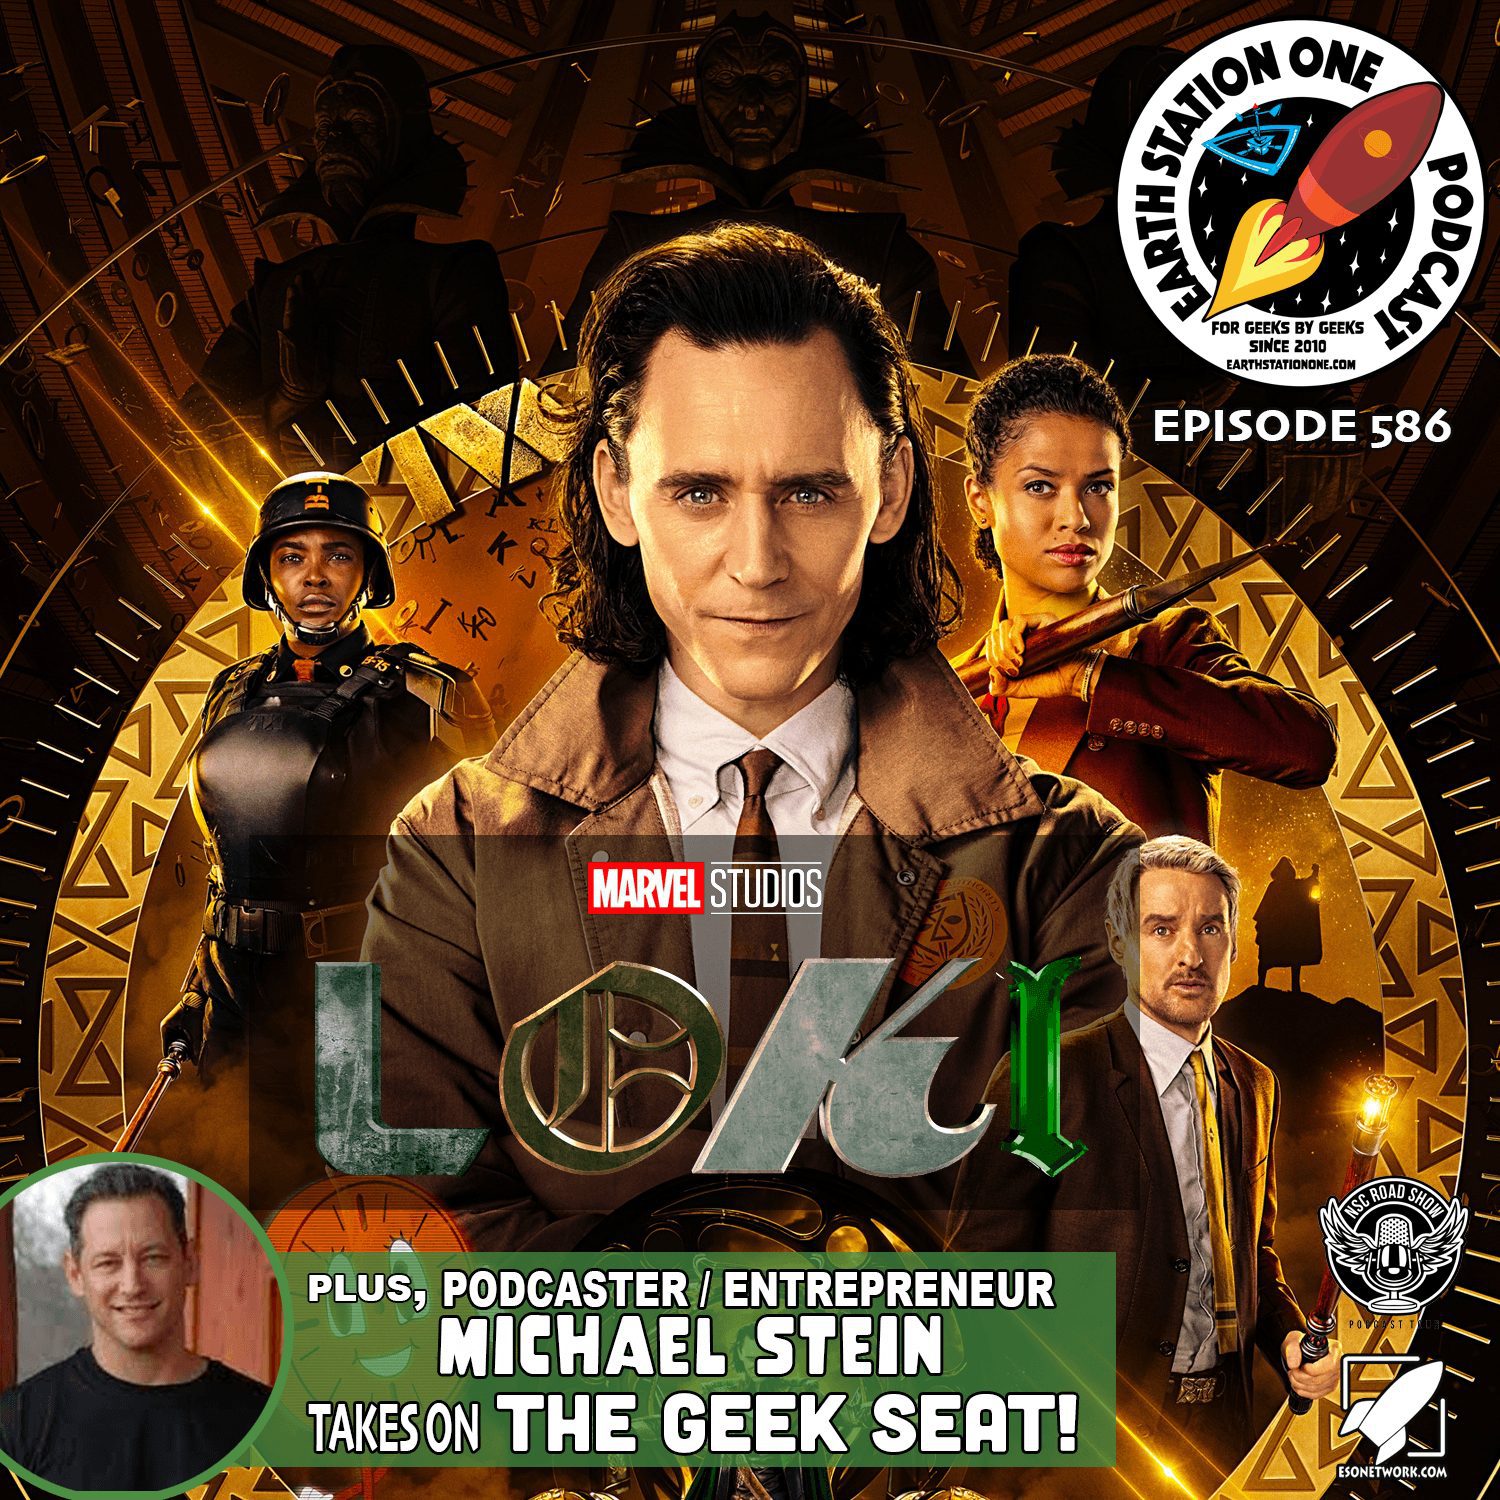 Earth Station One Podcast Ep 586 - Loki Season 1 Review